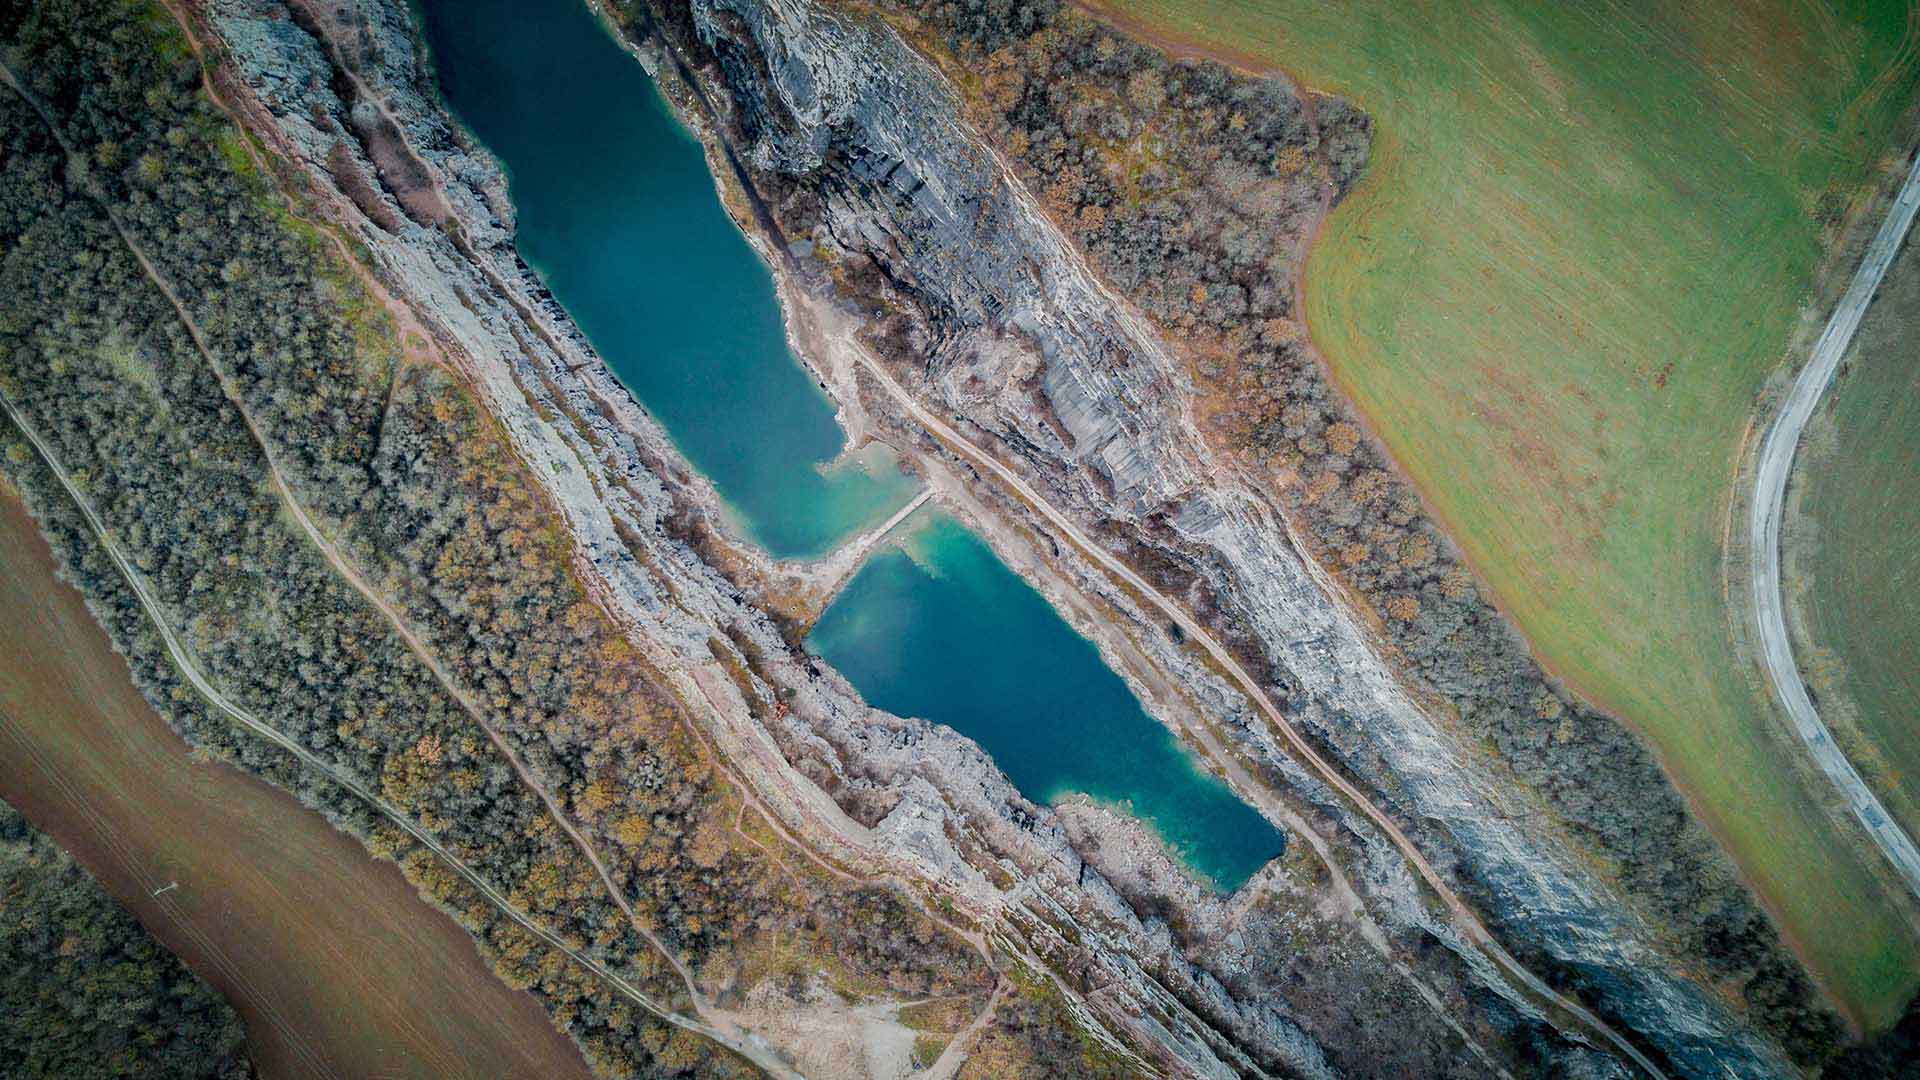 This quarry with its retention pool is an example of a natural resources company\'s work